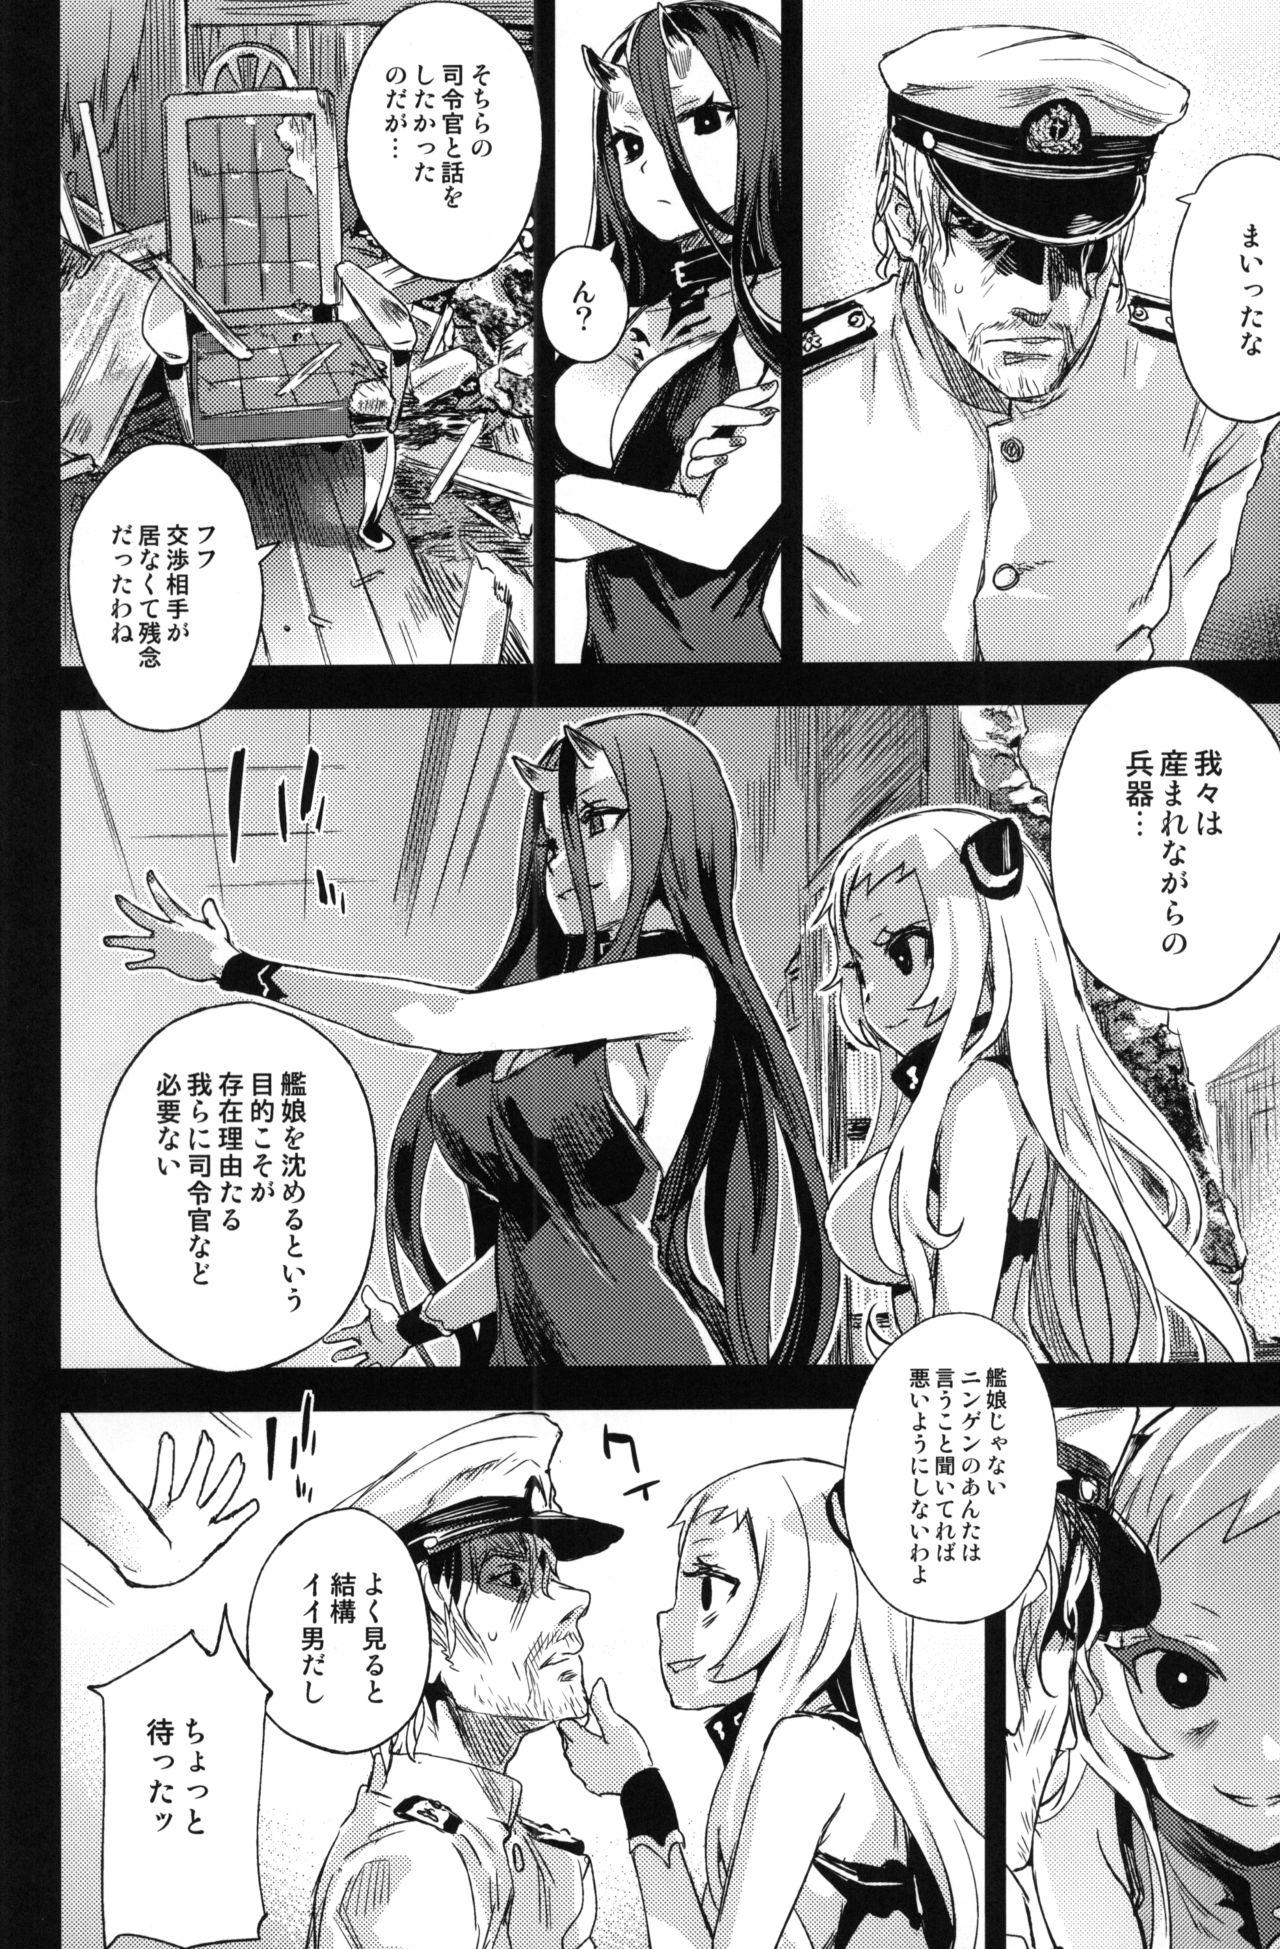 Lovers VictimGirls 17 SOS - Kantai collection X - Page 3